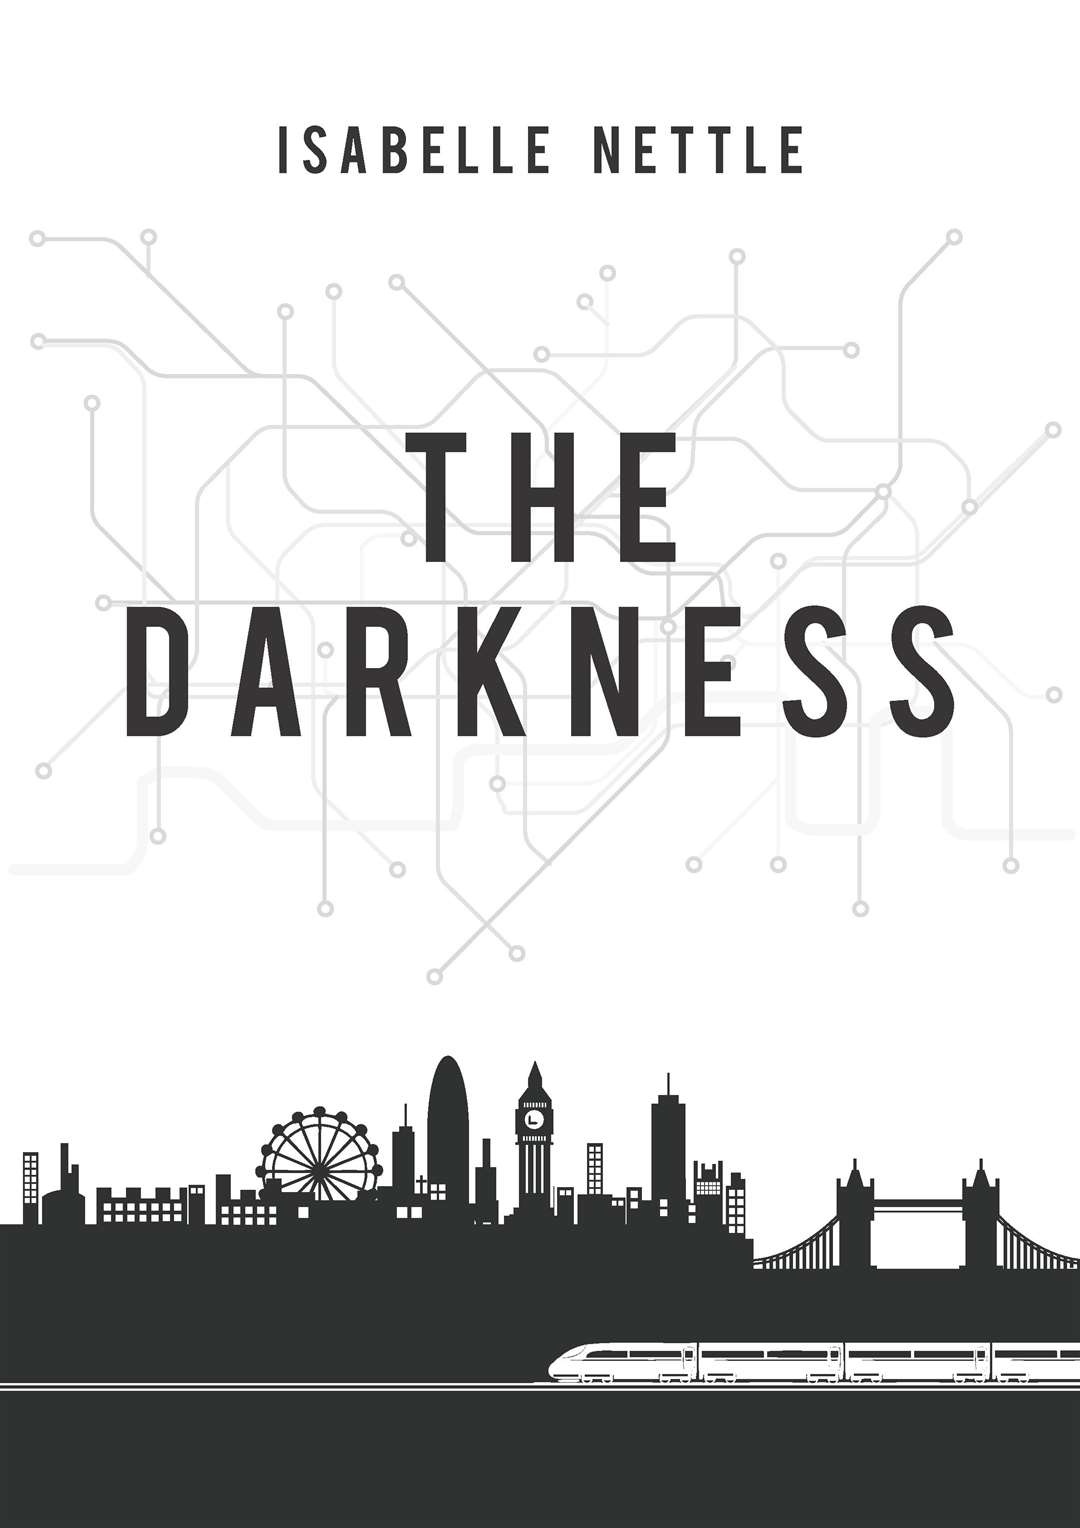 Isabelle Nettle's book: The Darkness